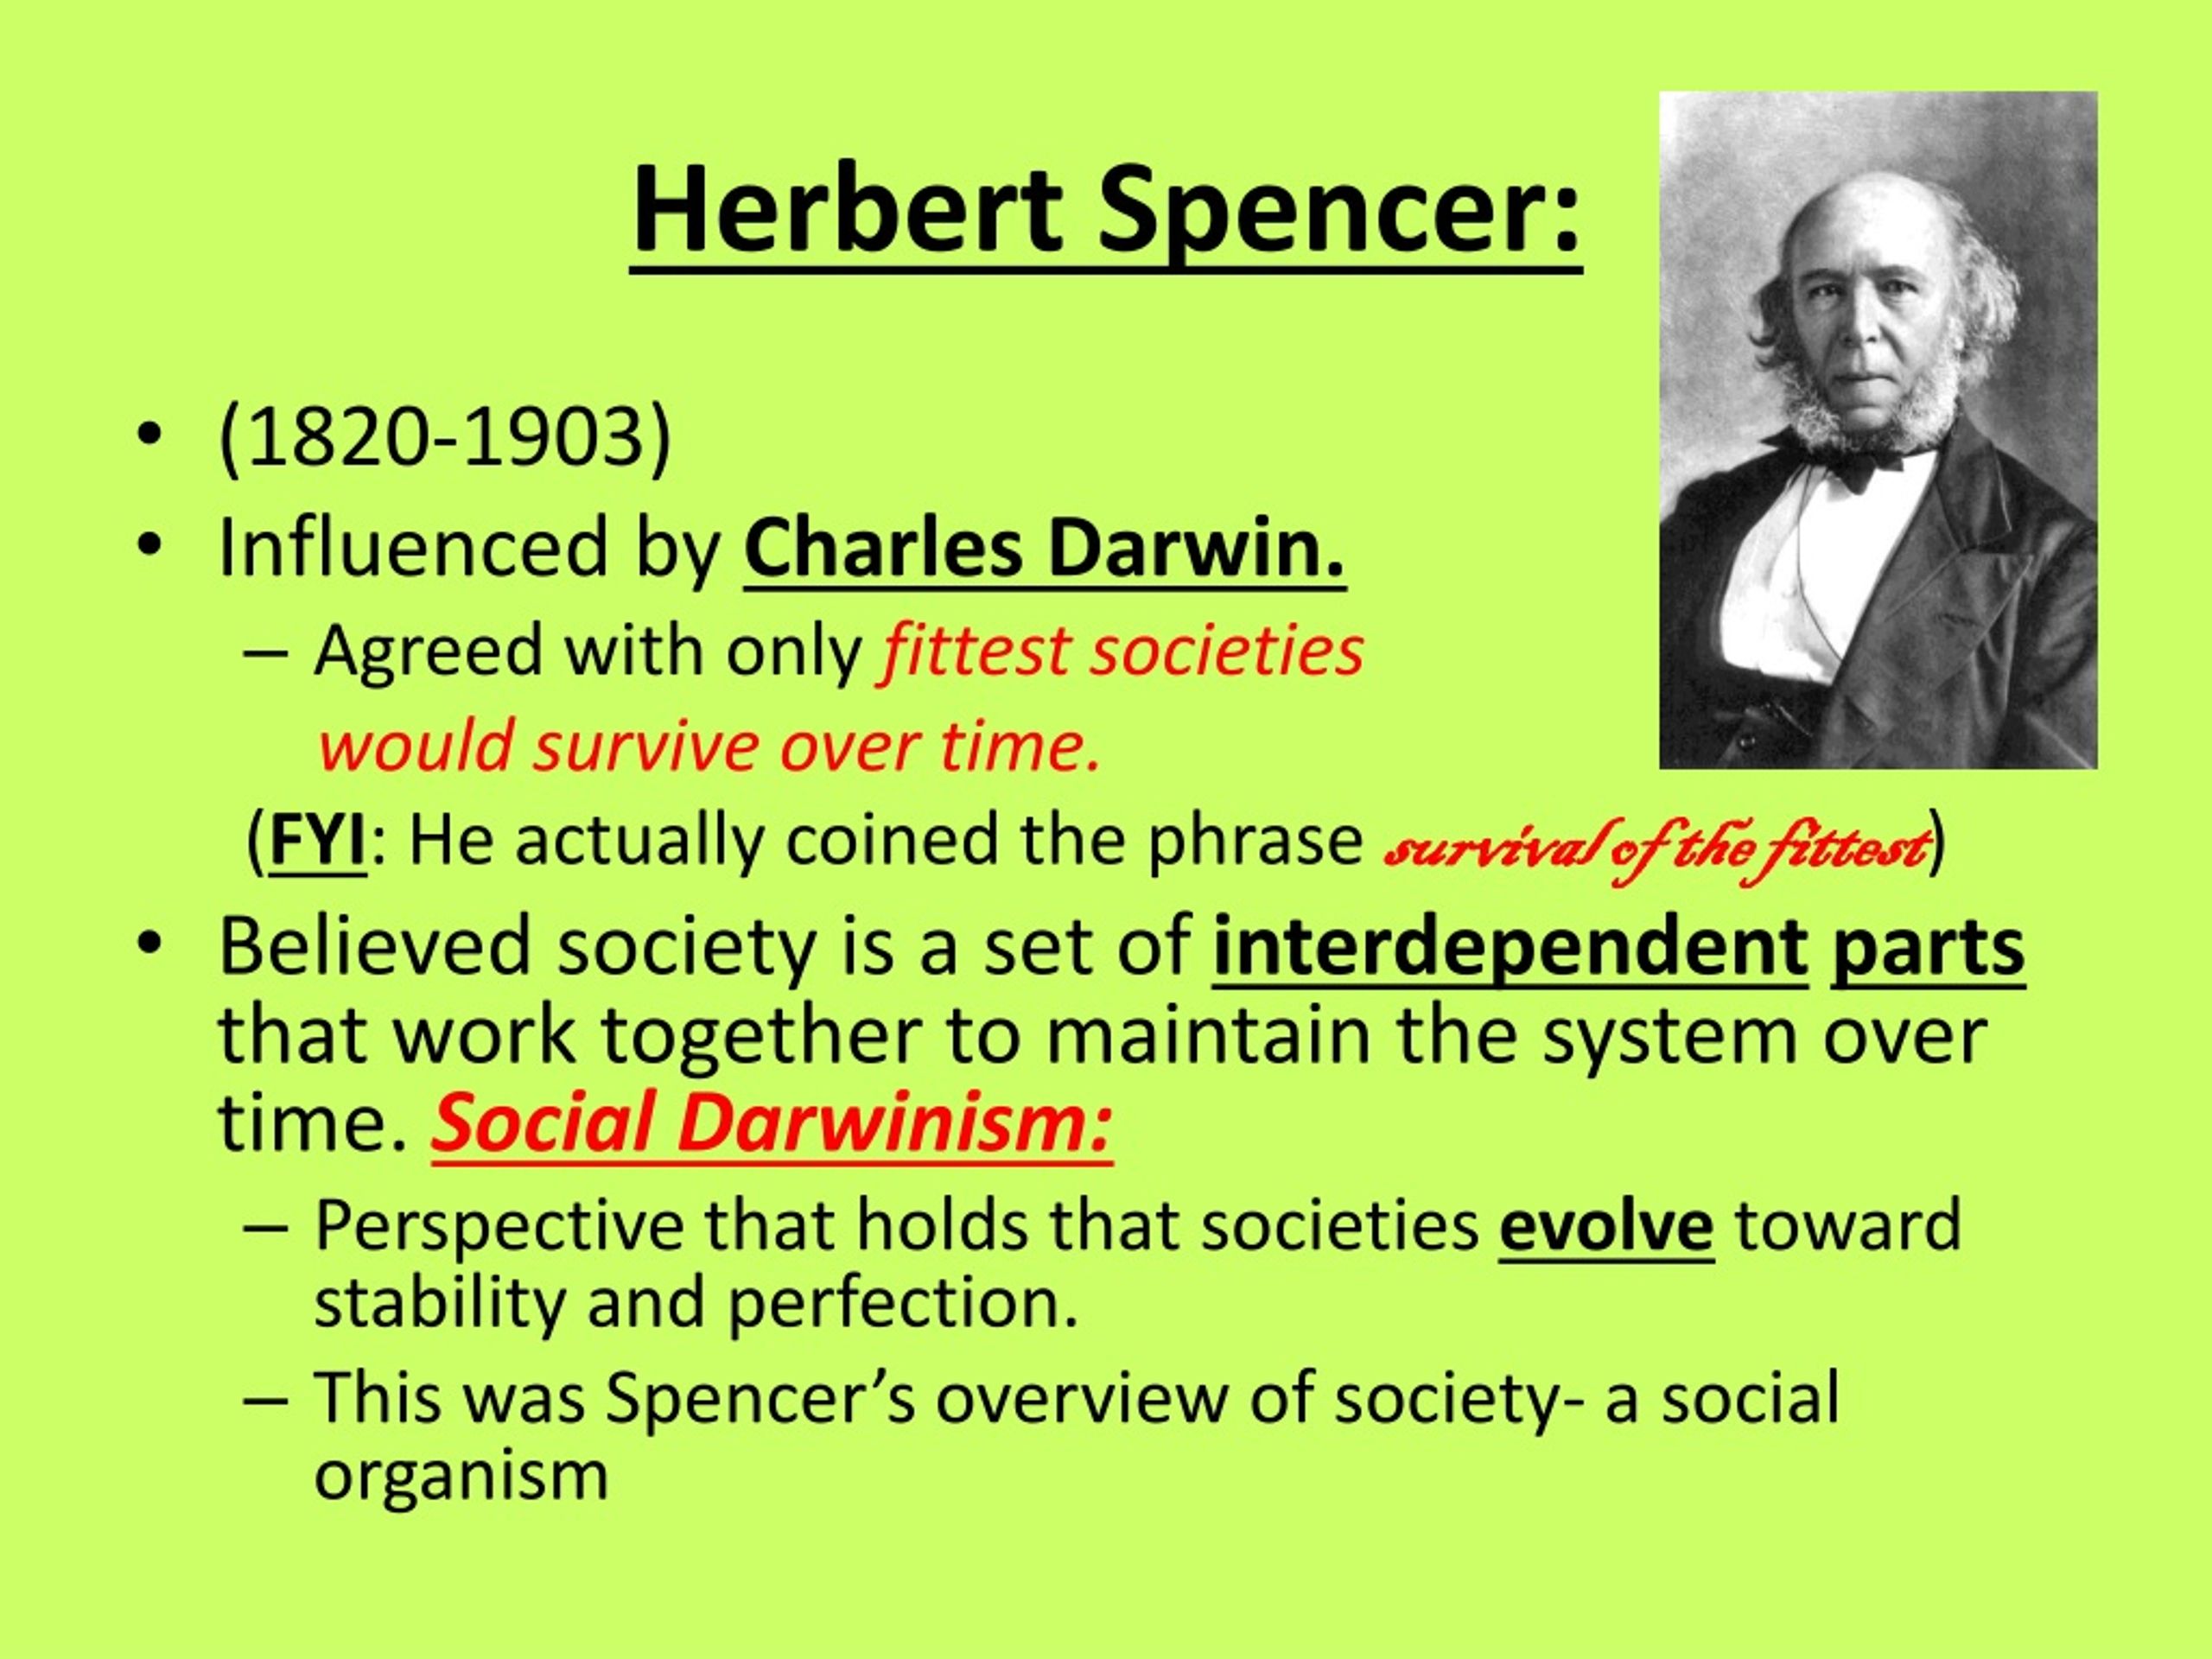 theory of social darwinism by herbert spencer